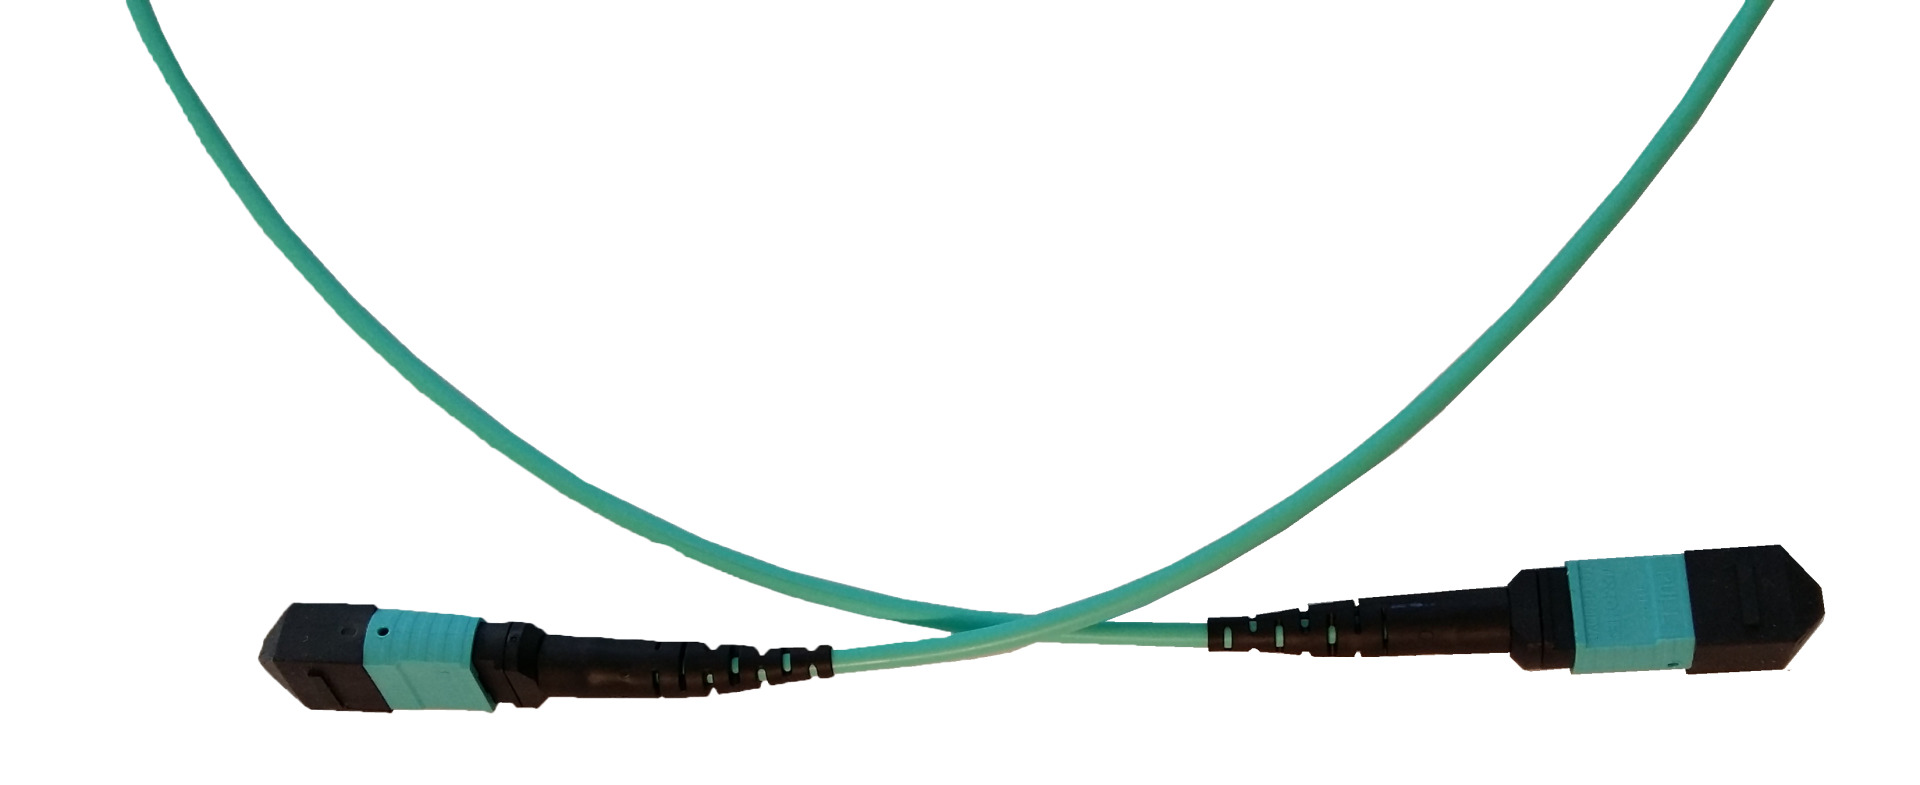 MTP/MPO Trunkcable 12 fiber MM OM3, 10m,Turquise, dobb.jacket OD=4,5mm  